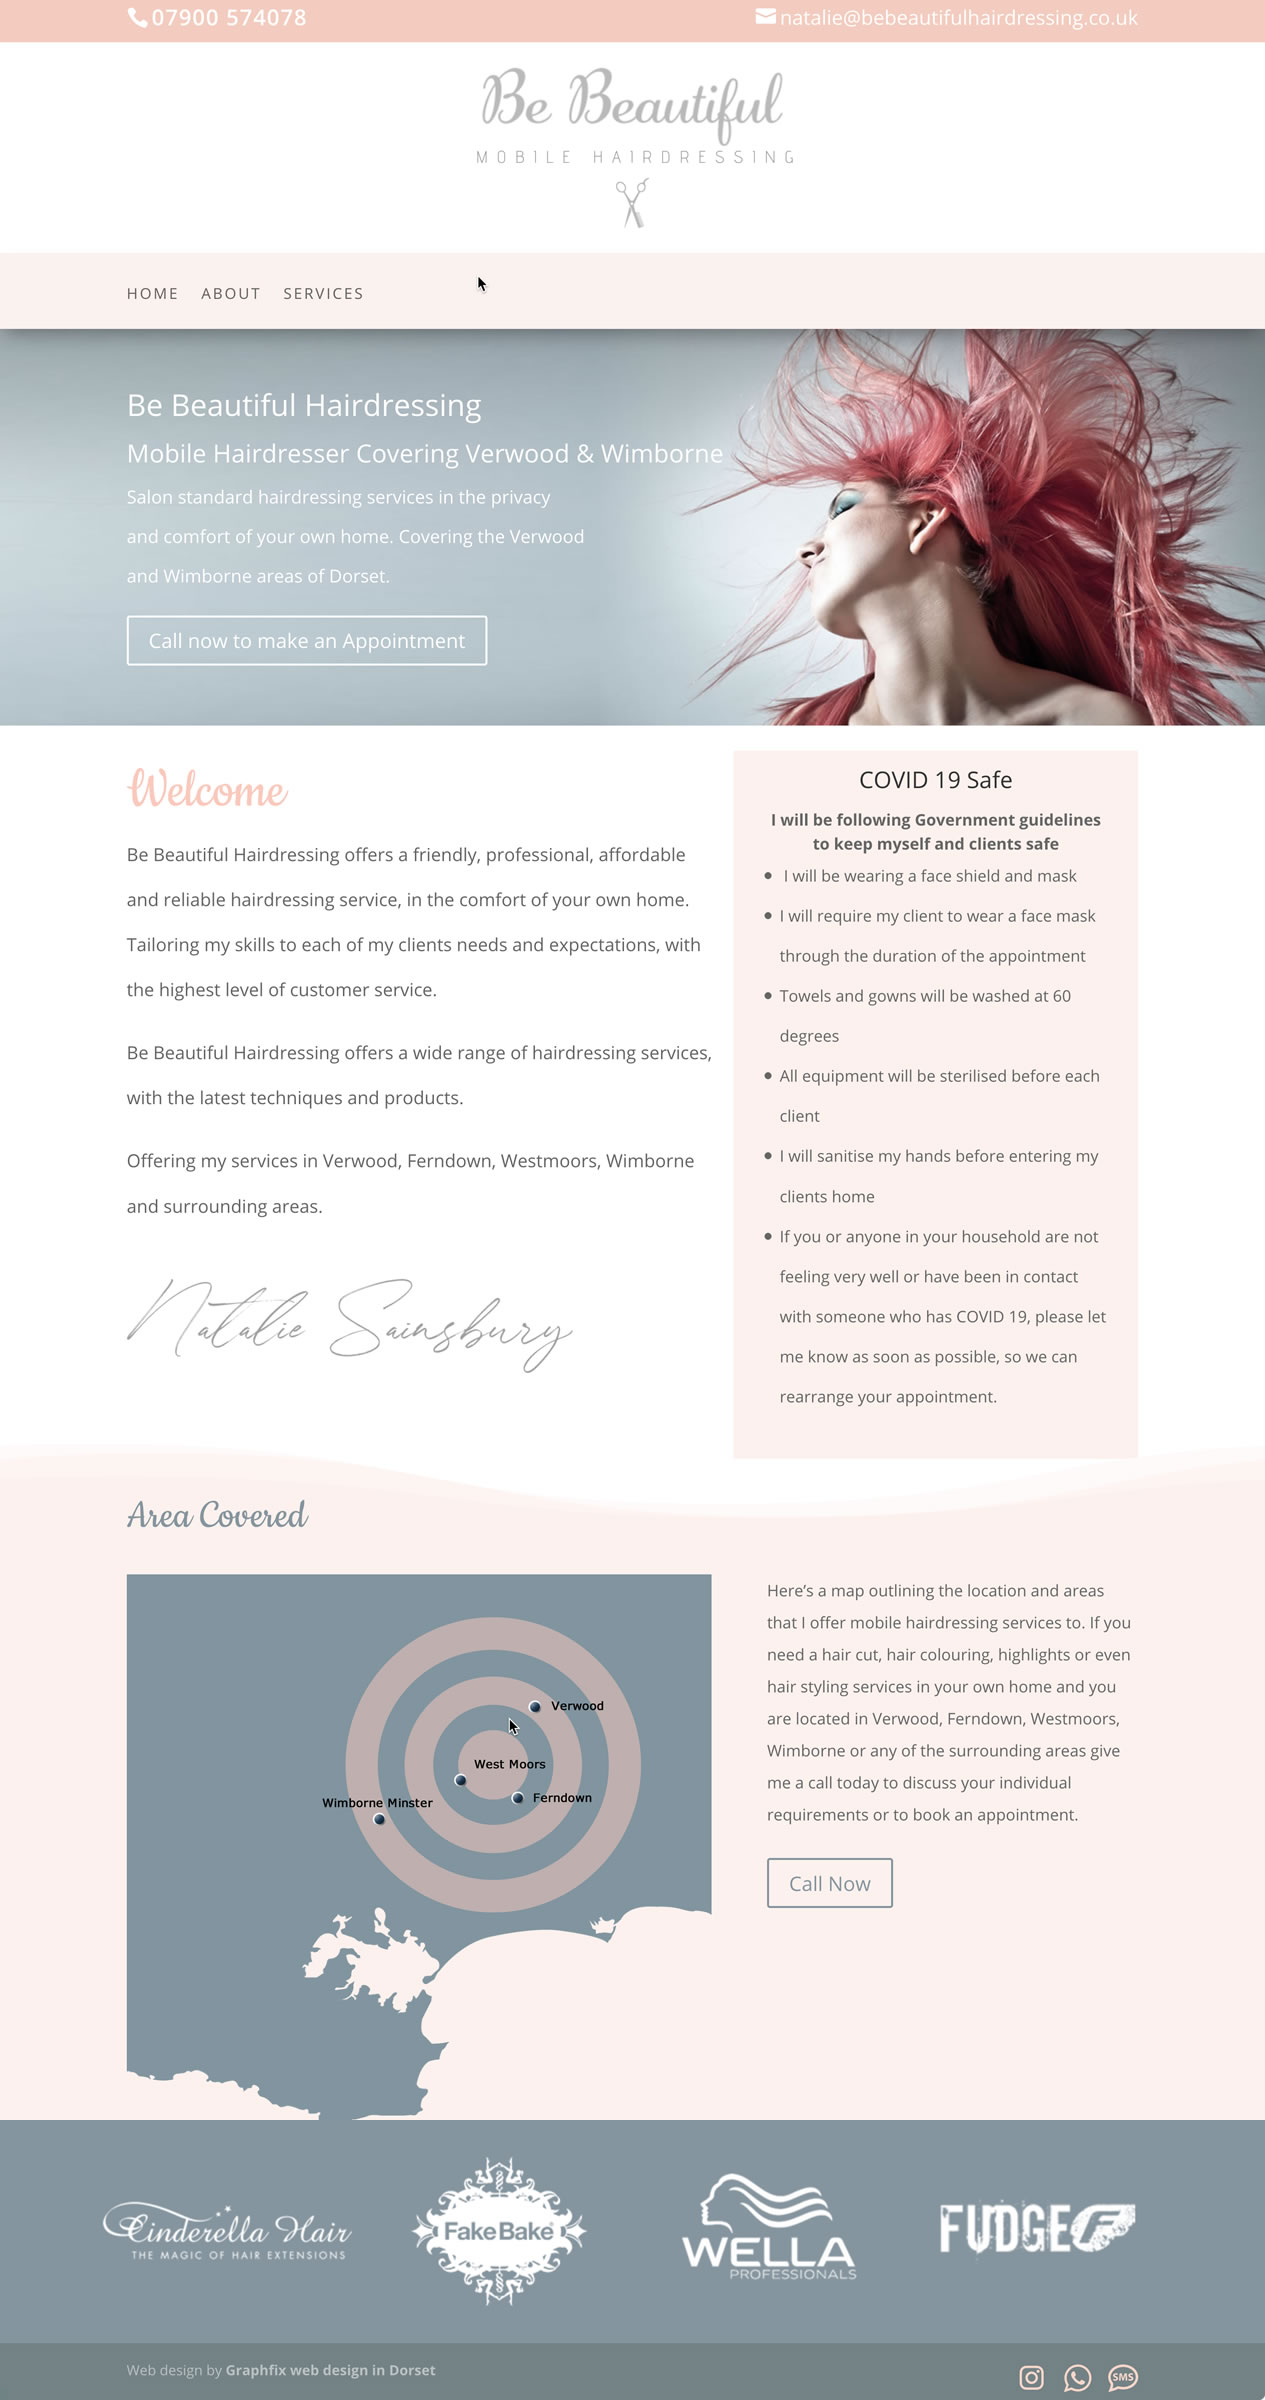 Website created for Mobile Hairdressers in Dorset